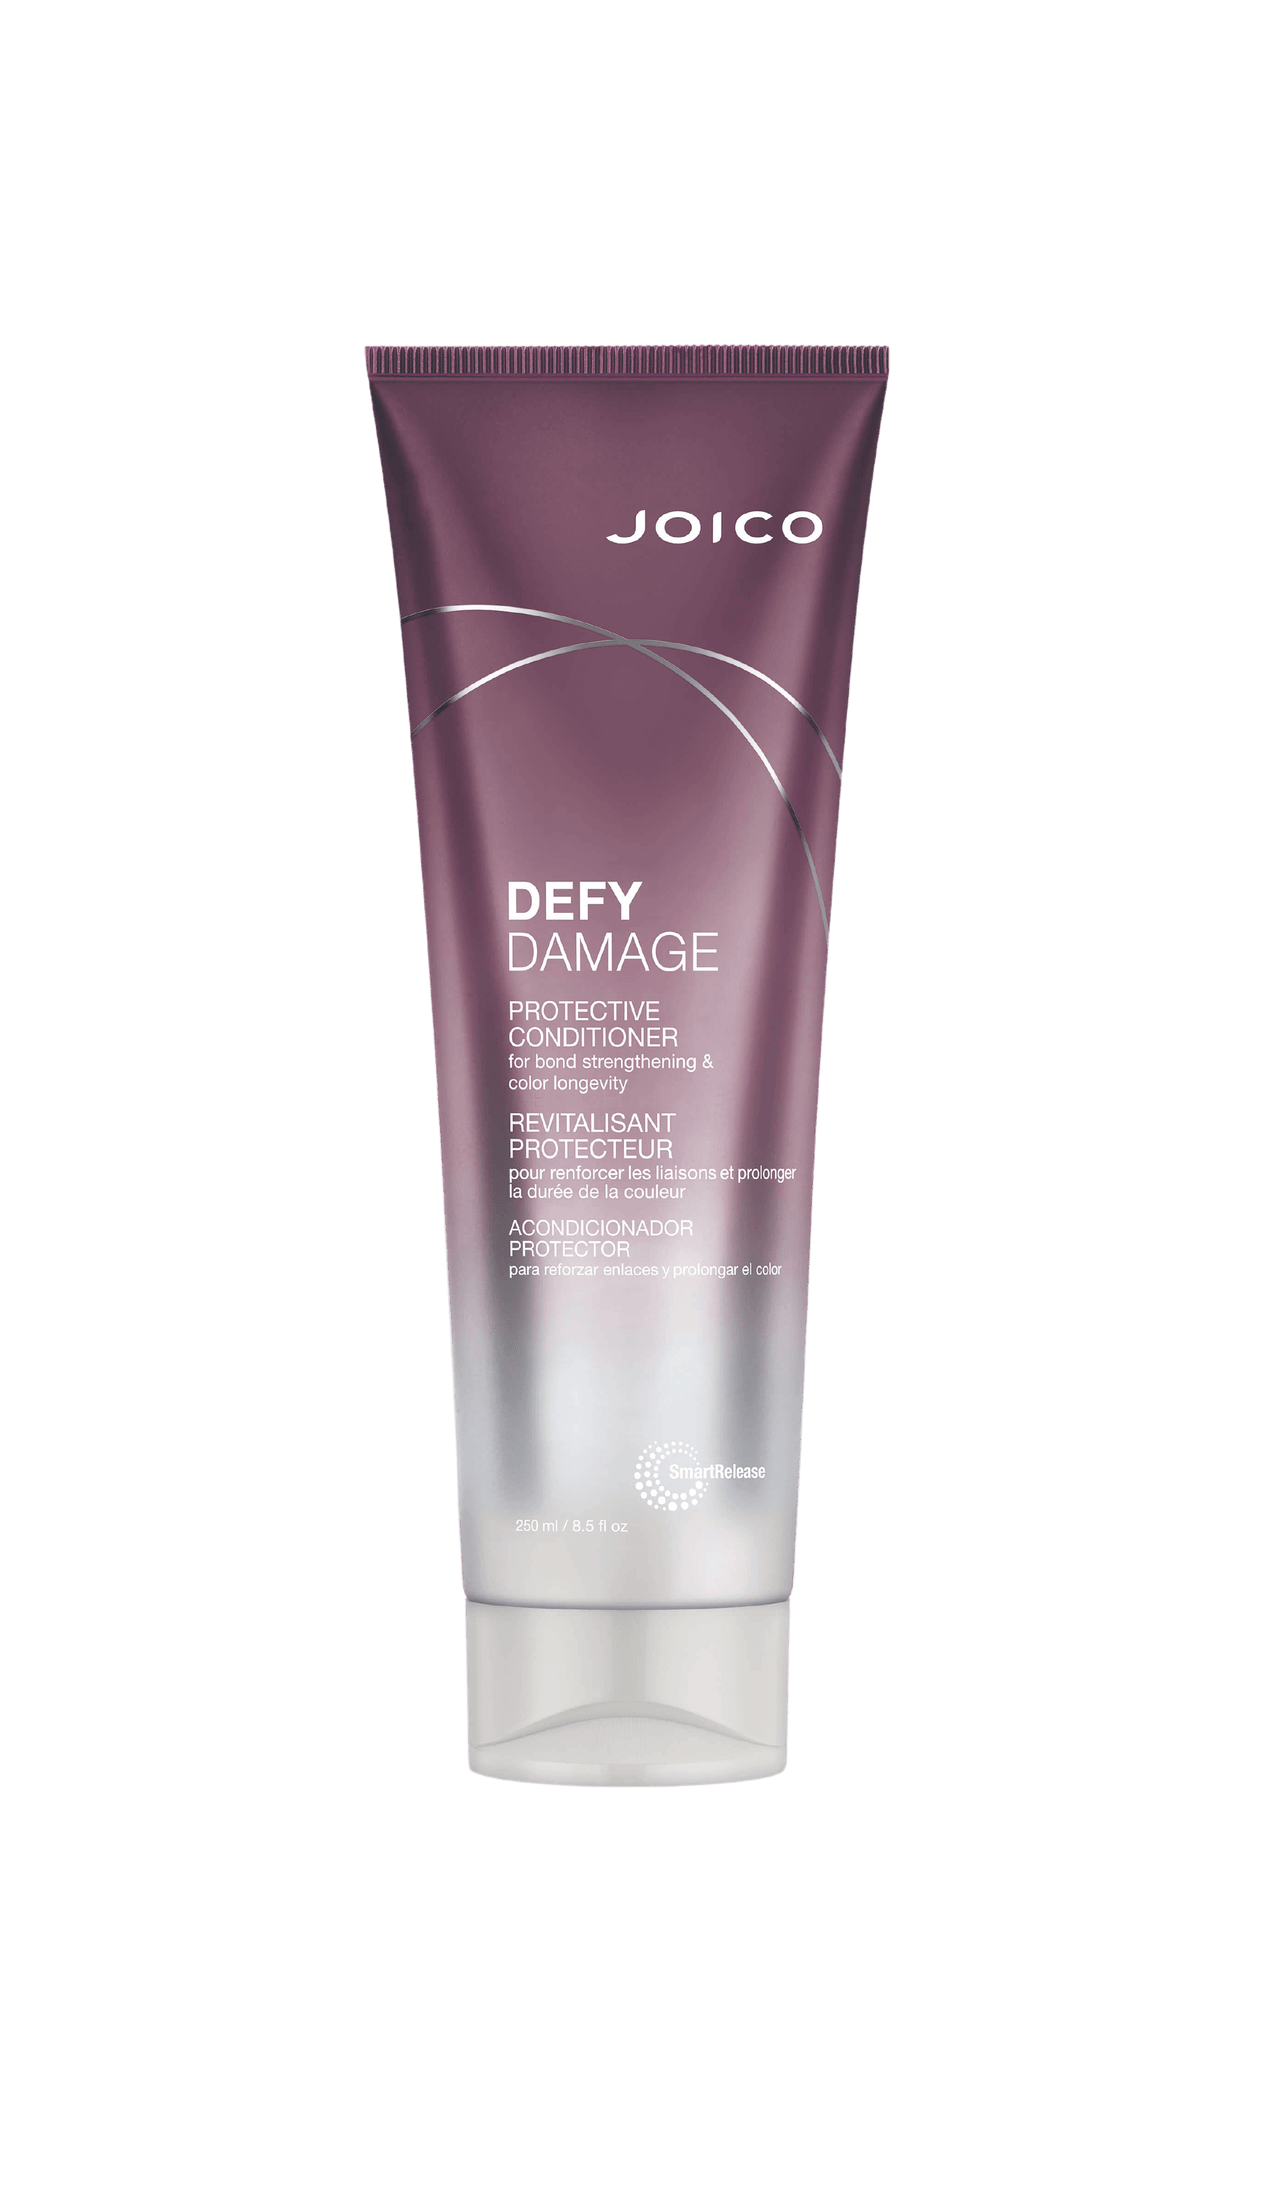 Joico Defy Damage Protective Conditioner 250mL Tube